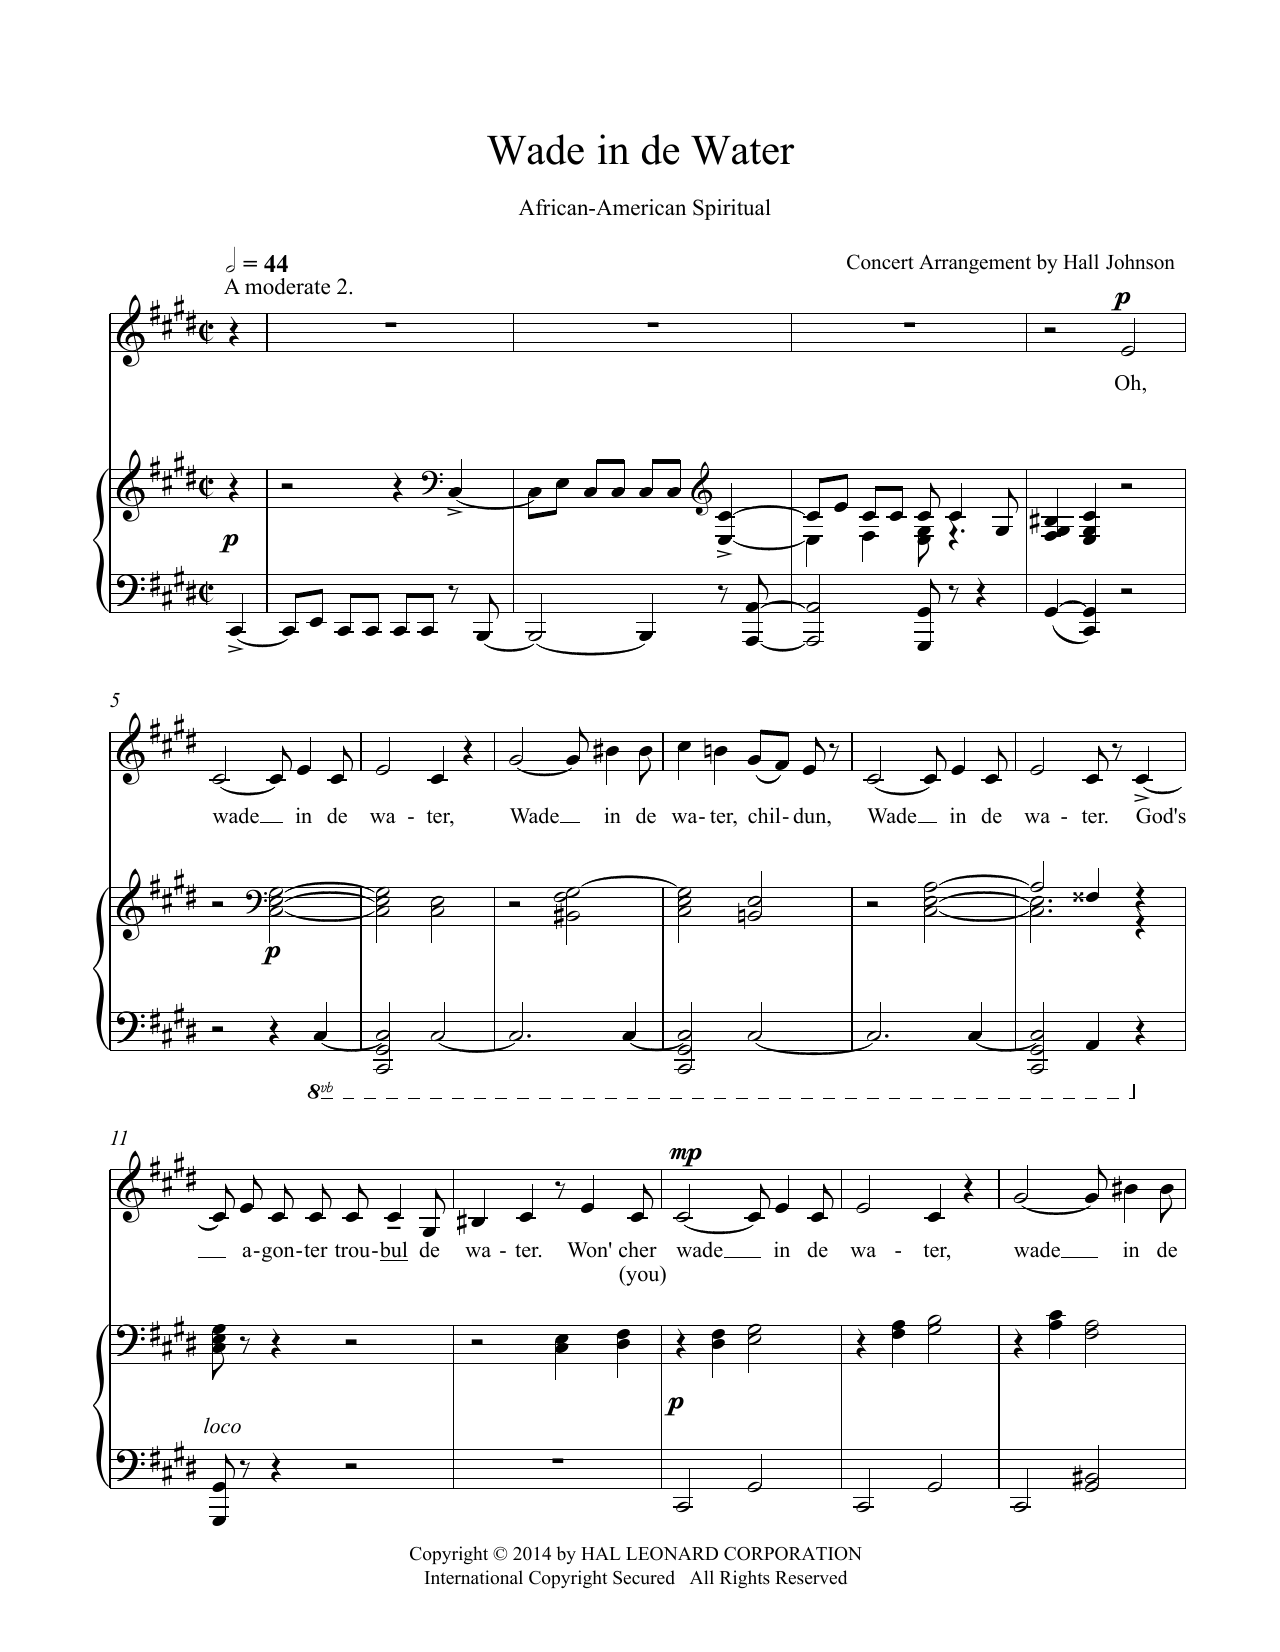 Hall Johnson Wade in de Water (C-sharp minor) sheet music notes and chords. Download Printable PDF.